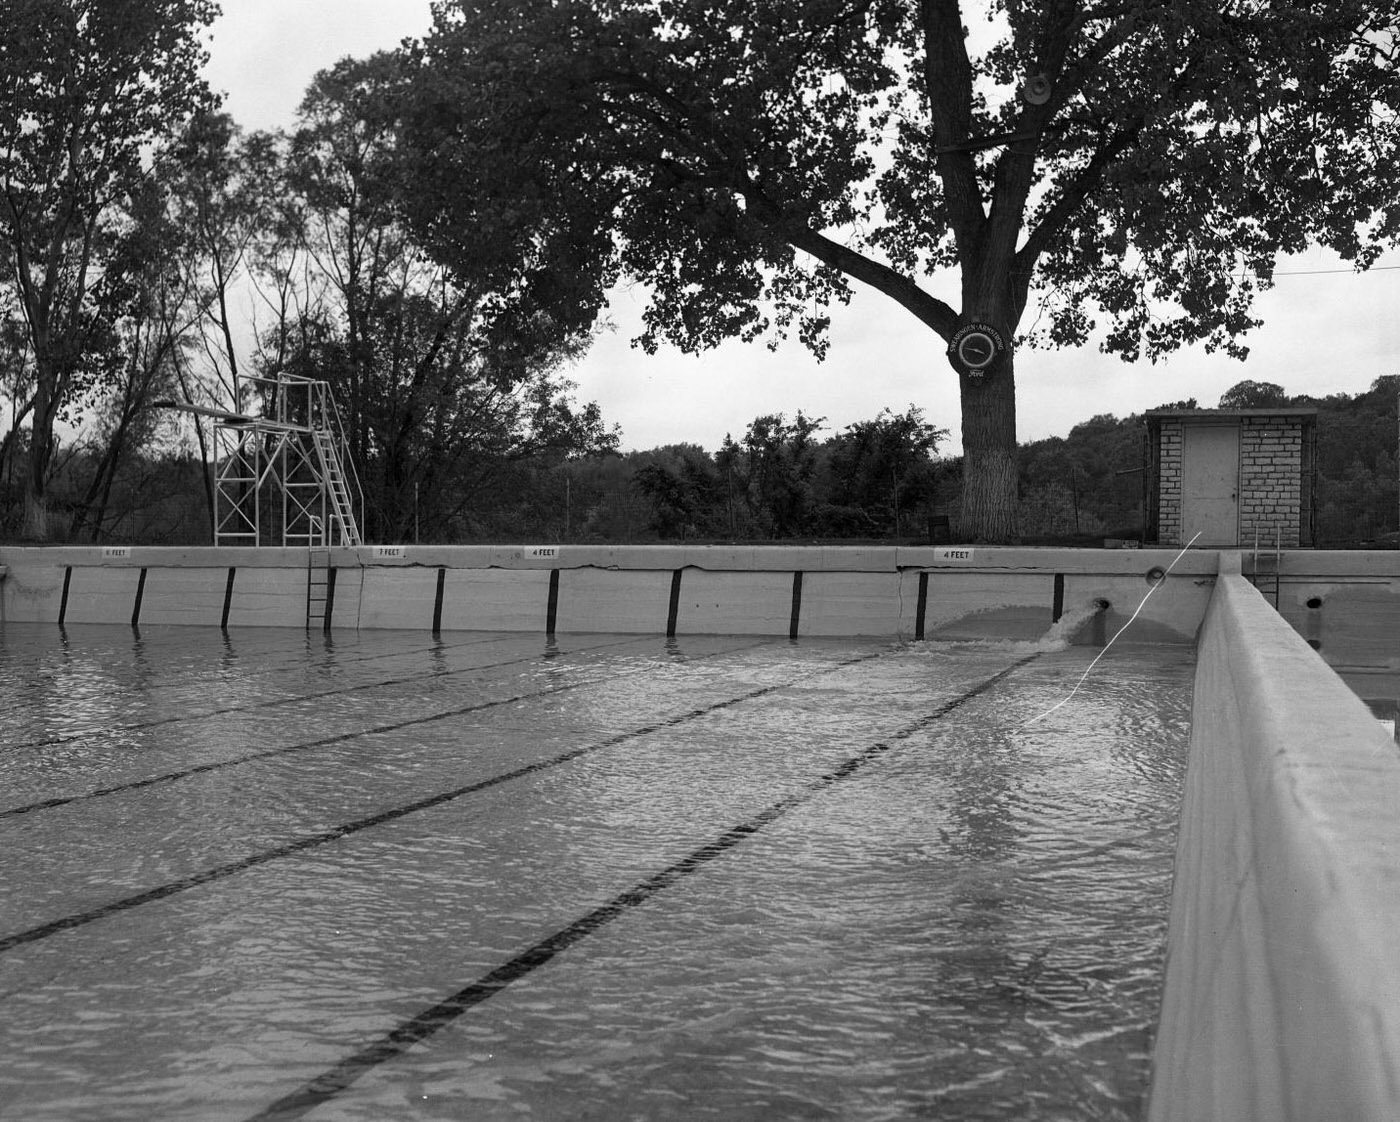 Deep Eddy Pool Being Filled with Water, 1950